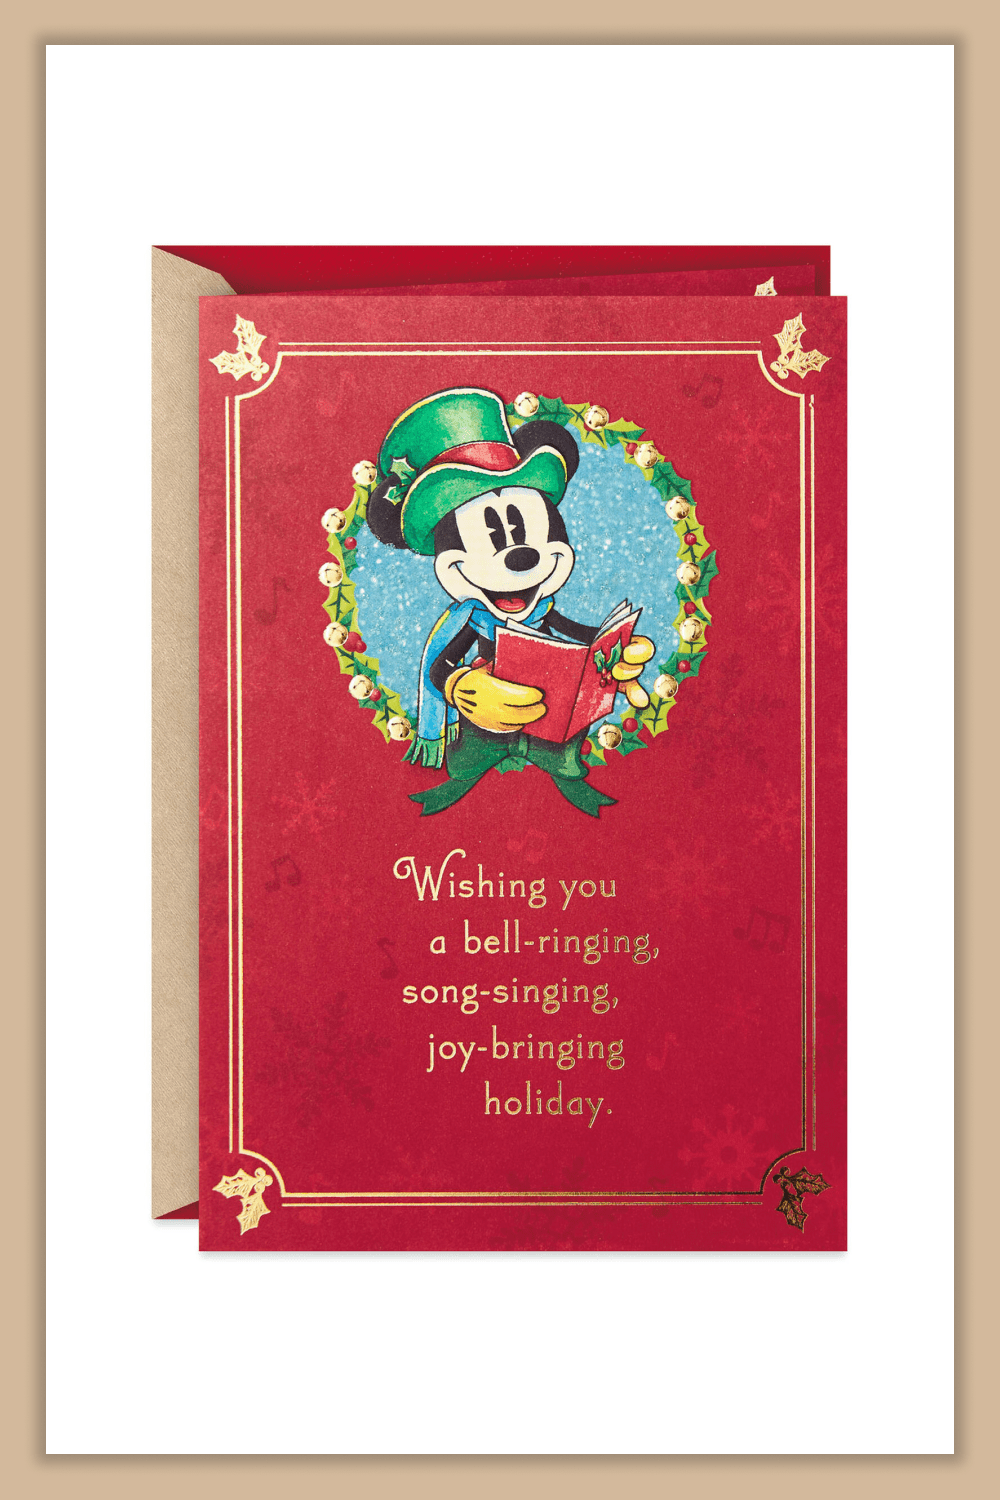 Christmas card with Mickey Mouse and his friends from Disney Universe.